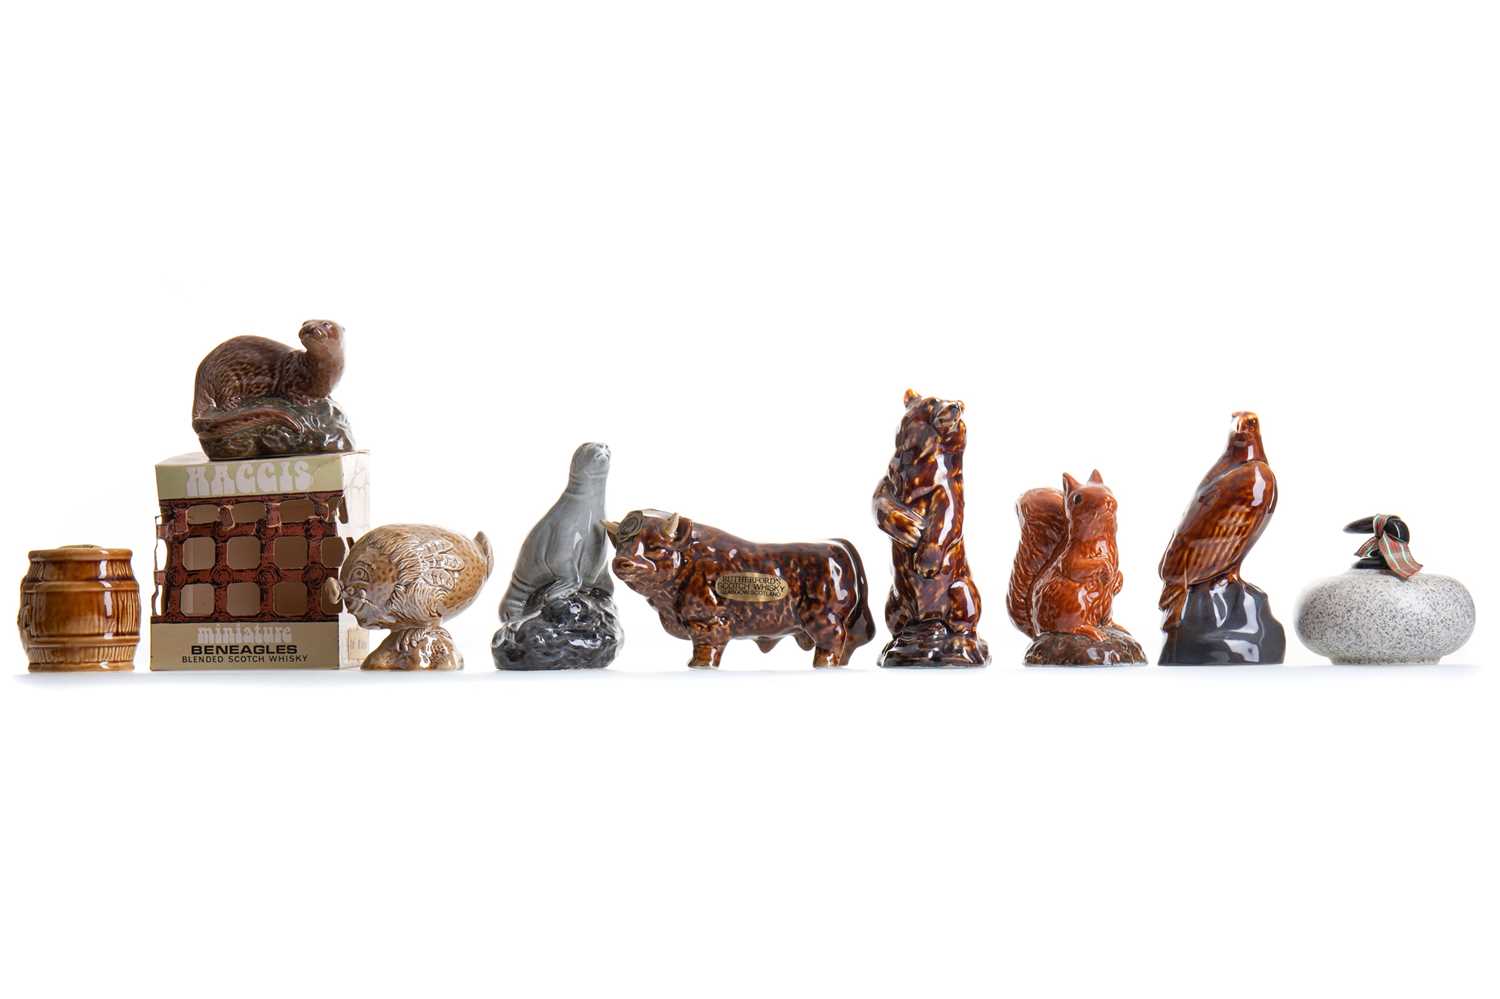 Lot 47 - 11 NOVELTY WHISKY MINIATURES - INCLUDING BENEAGLES CERAMIC SQUIRREL